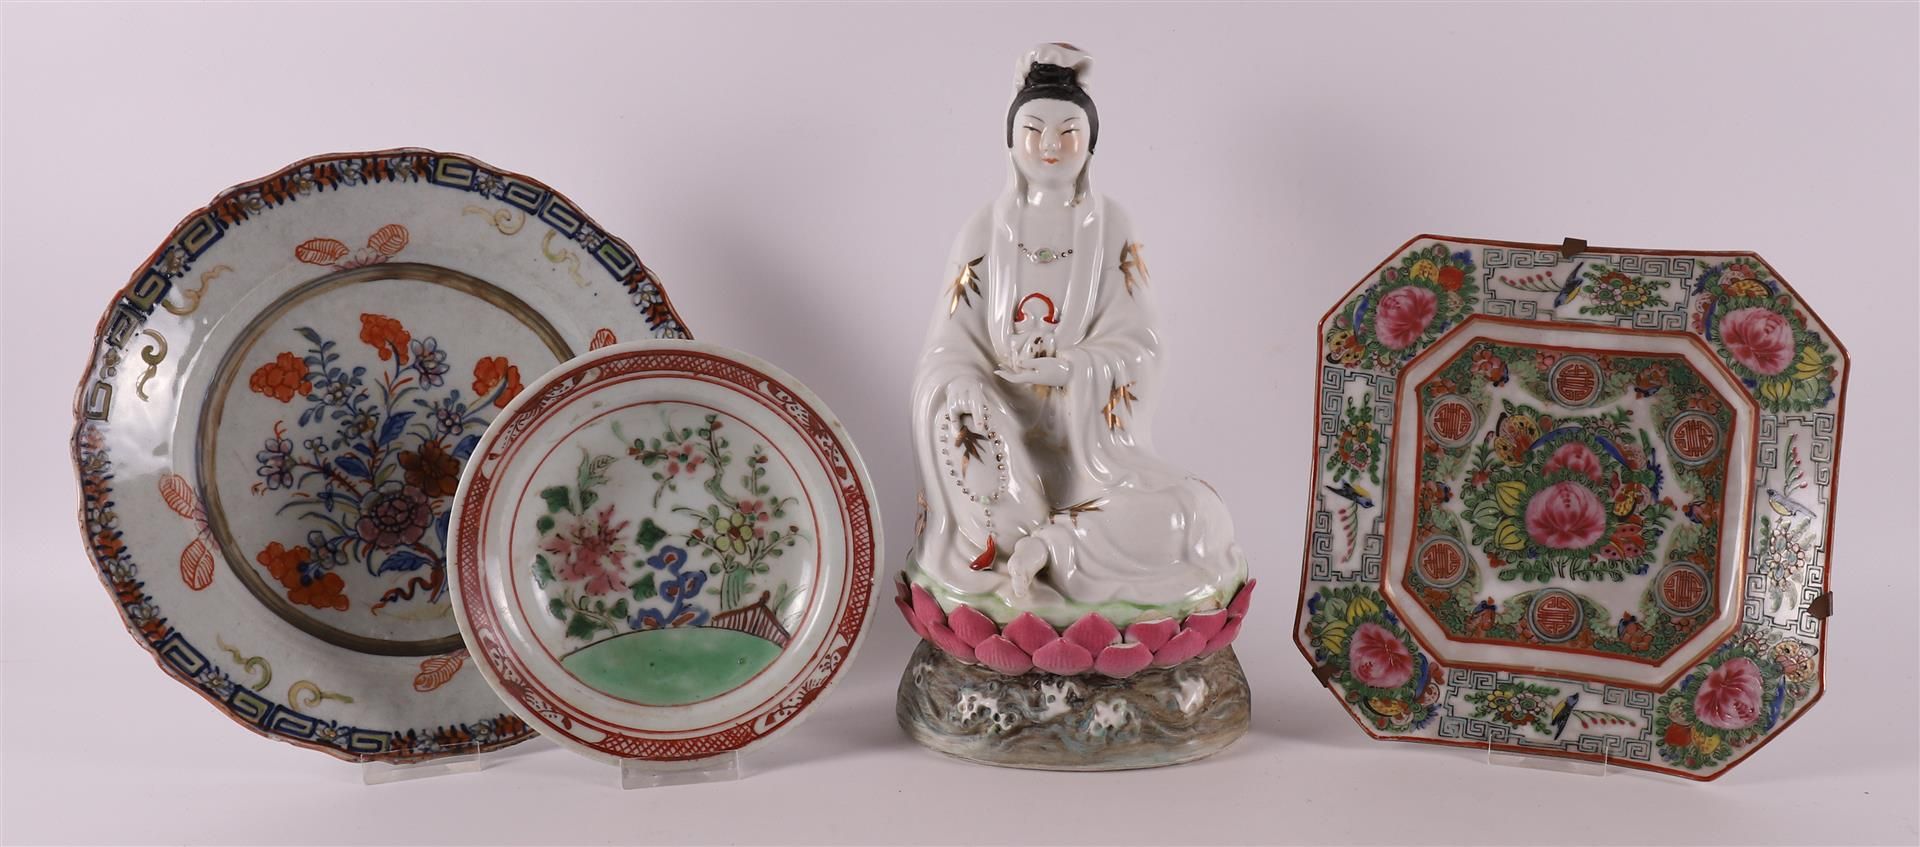 A porcelain seated Kwanyin on a lotus crown, China, mid-20th century.